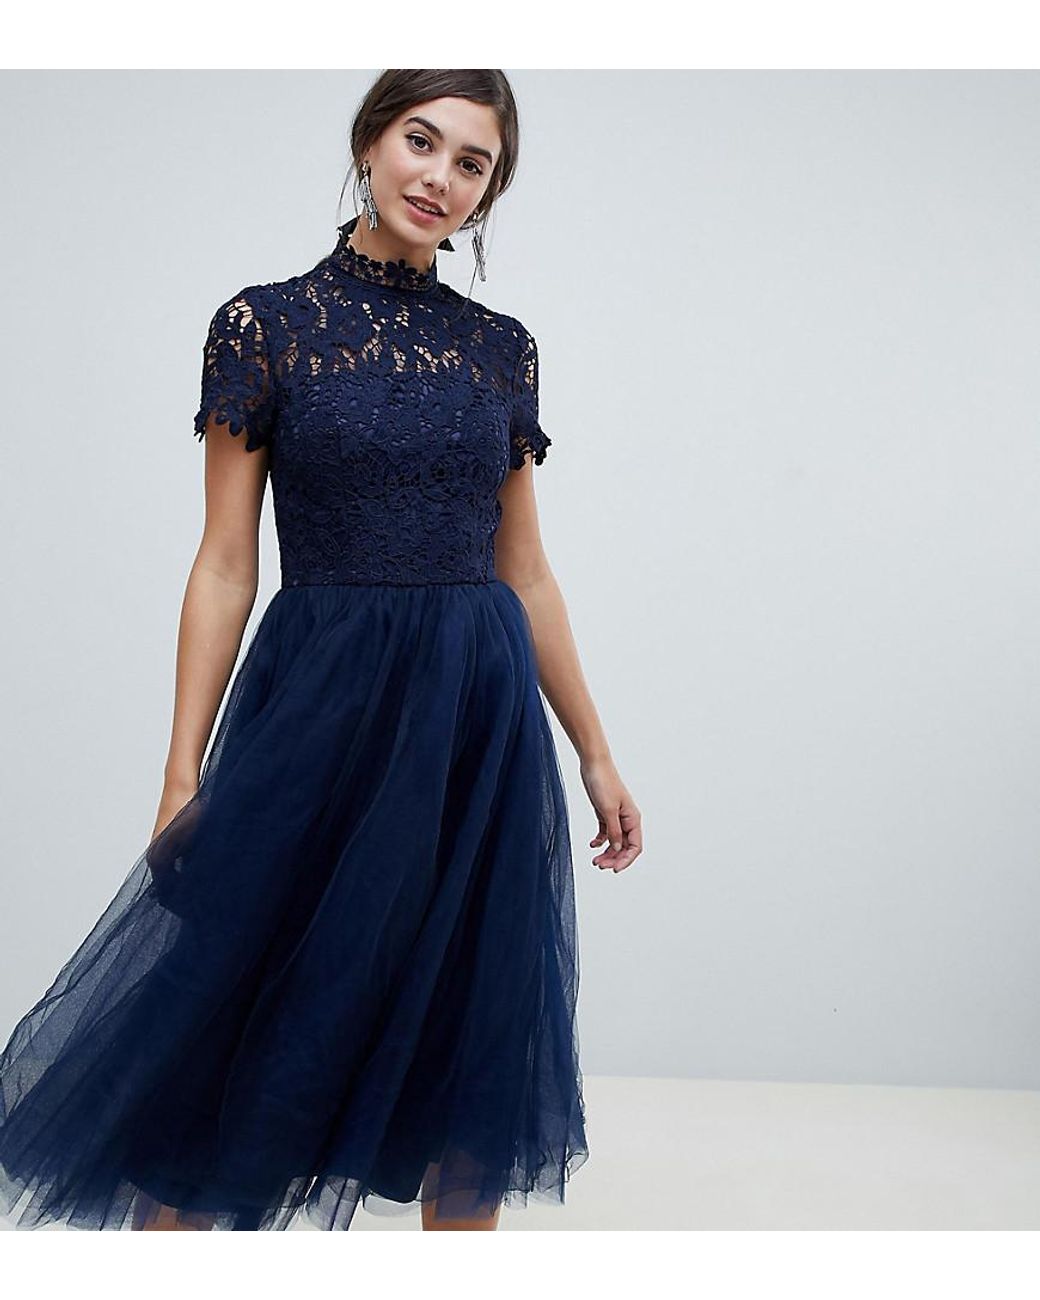 Chi Chi London High Neck Lace Midi Dress With Tulle Skirt in Blue | Lyst